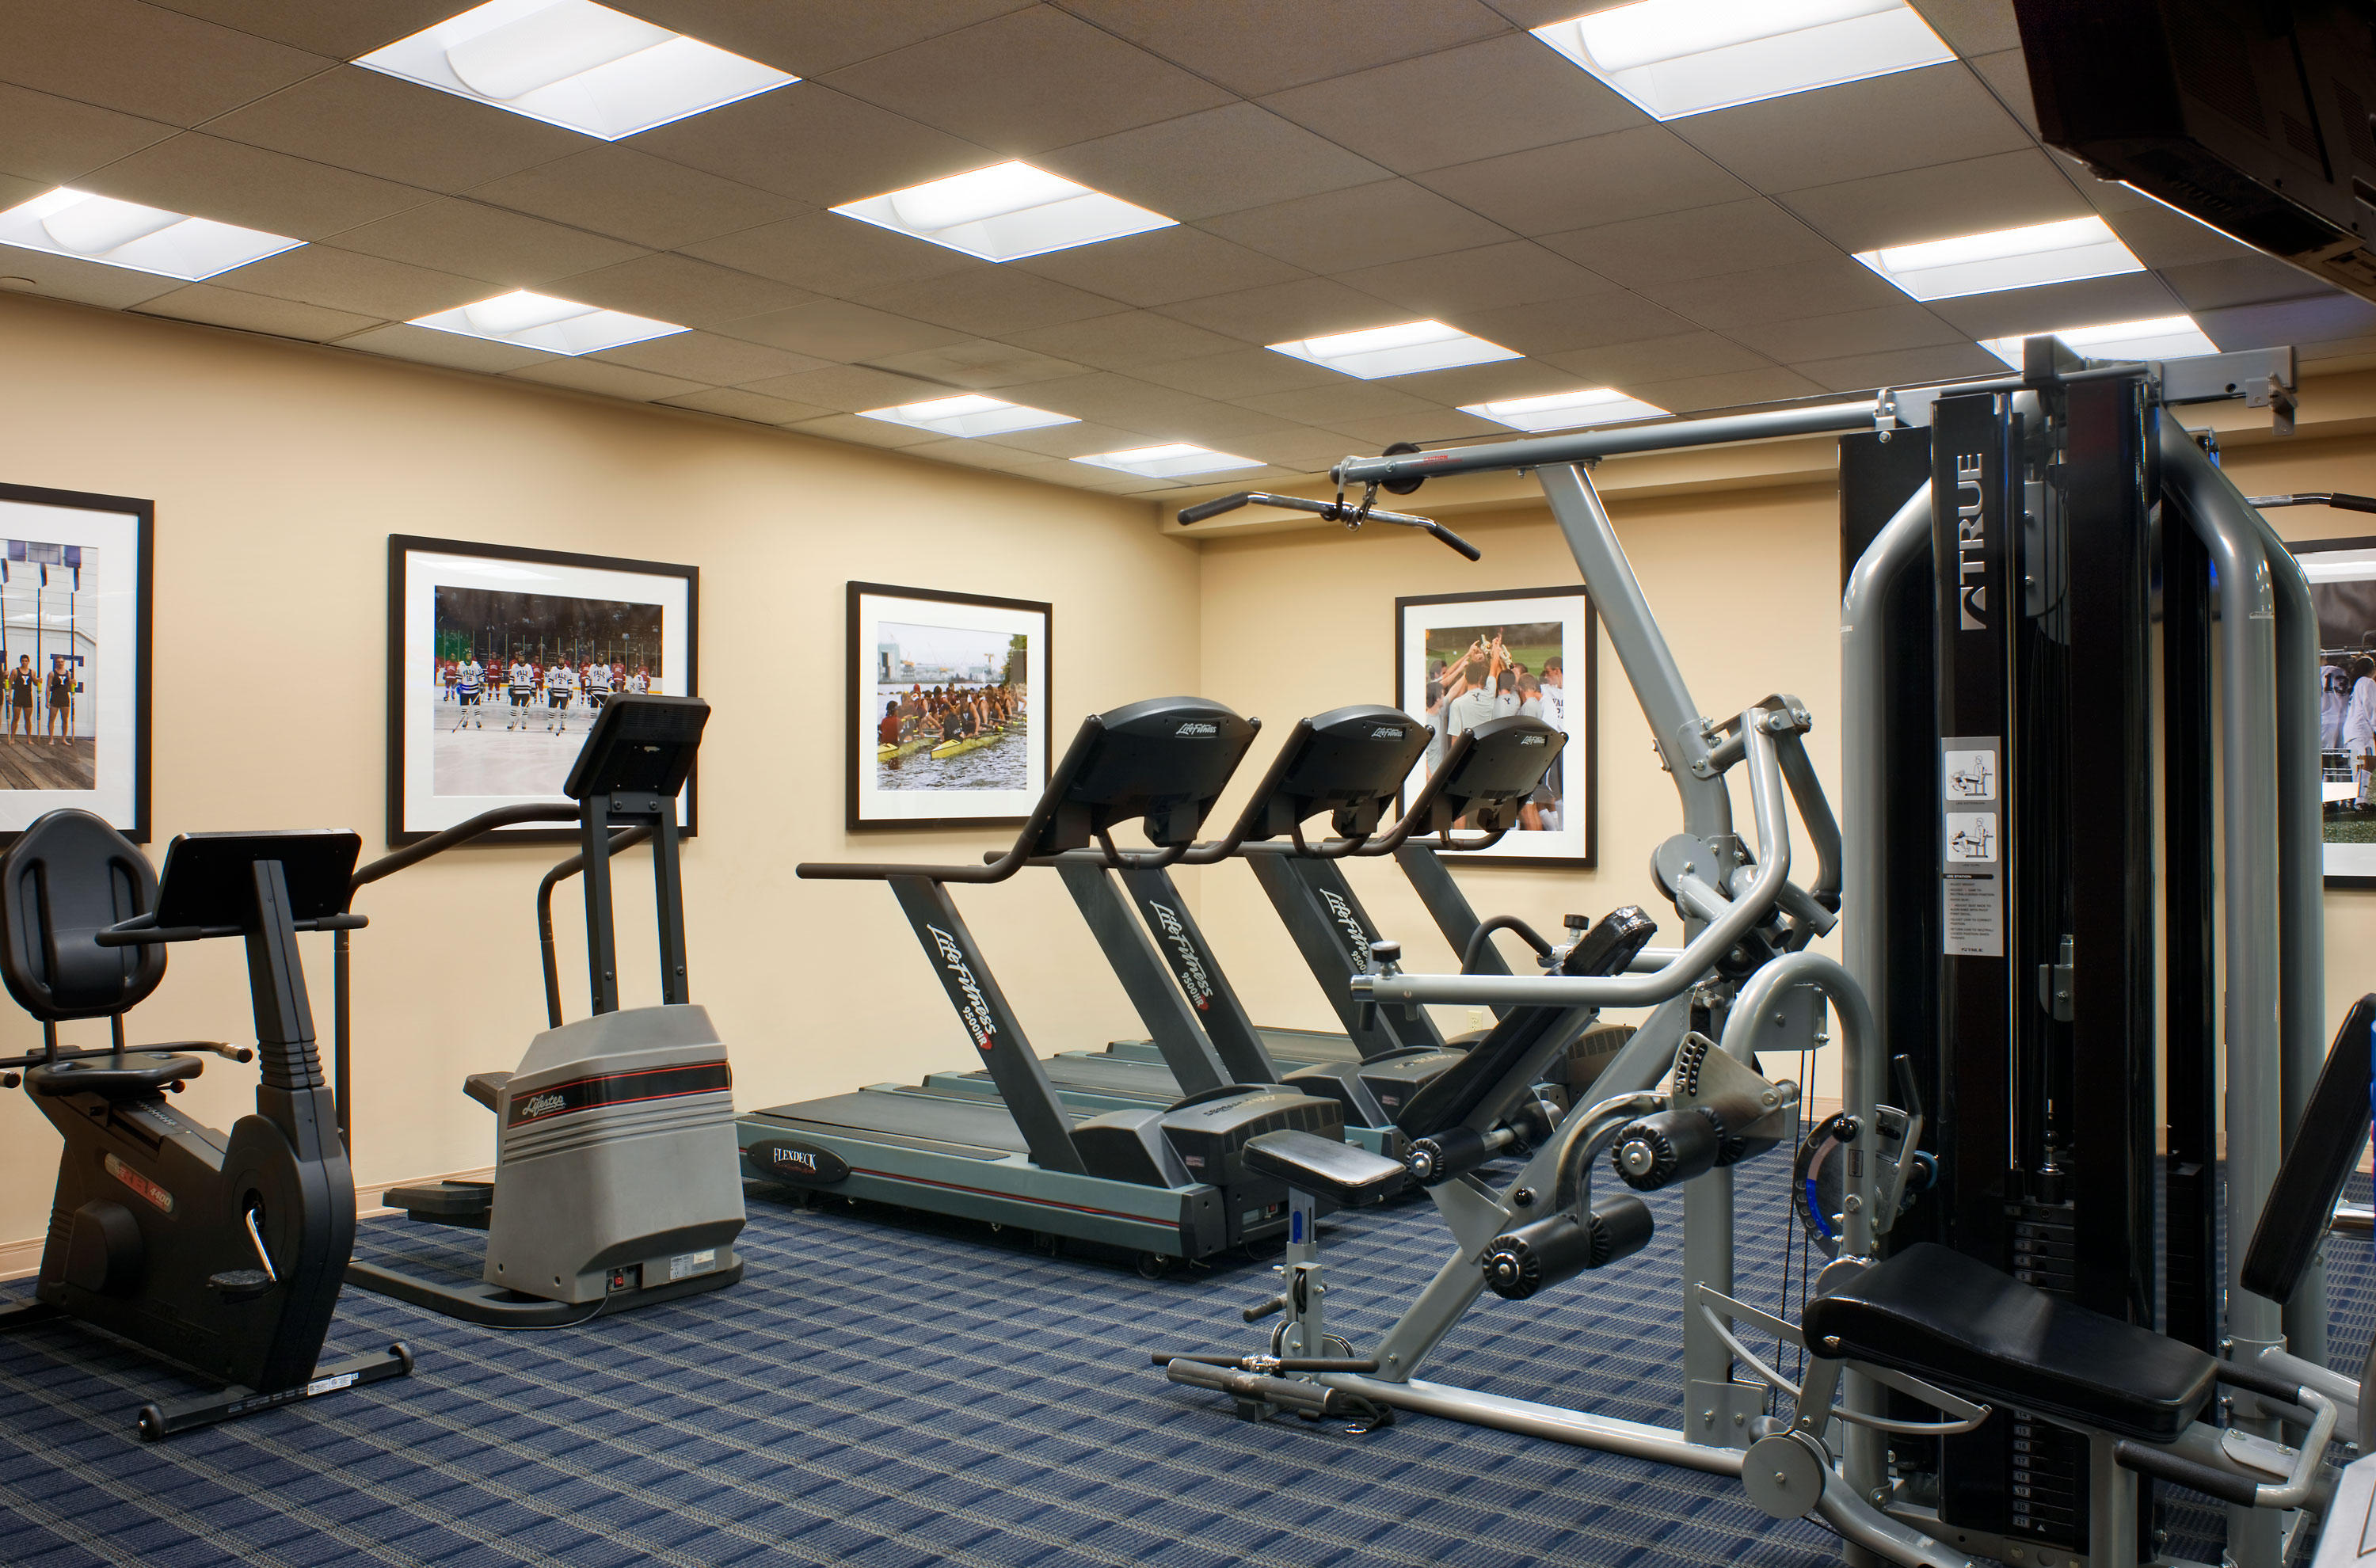 Our hotel fitness center is open 24 hours in New Haven, CT.